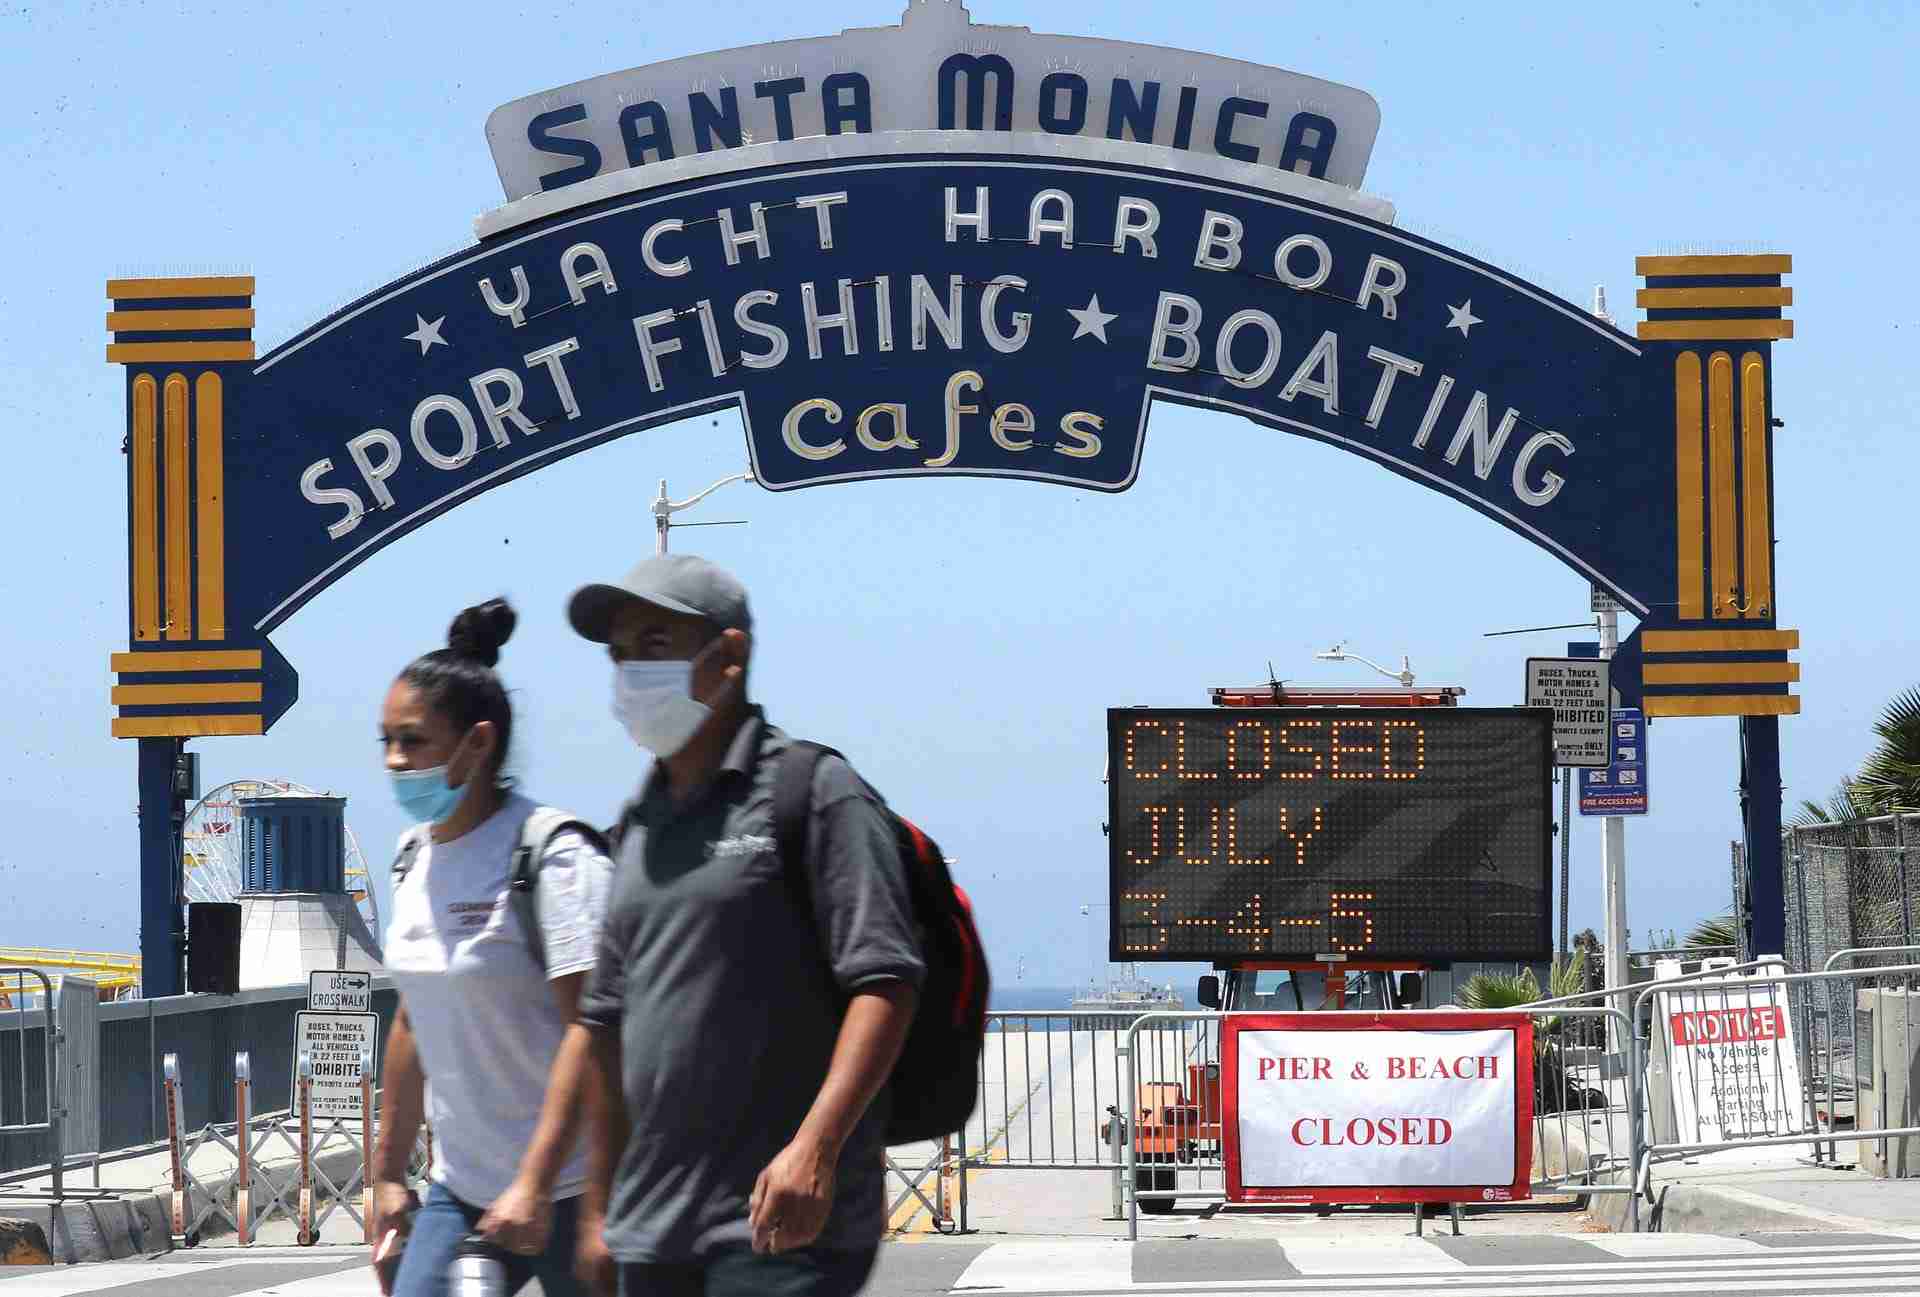 People wearing face coverings walk past the closed Santa Monica Pier amid the COVID-19 pandemic on July 3, 2020 in Santa Monica, California. Los Angeles County beaches and piers will be closed starting today through the July 4th holiday weekend amid some reinstated restrictions intended to slow the spread of the coronavirus.